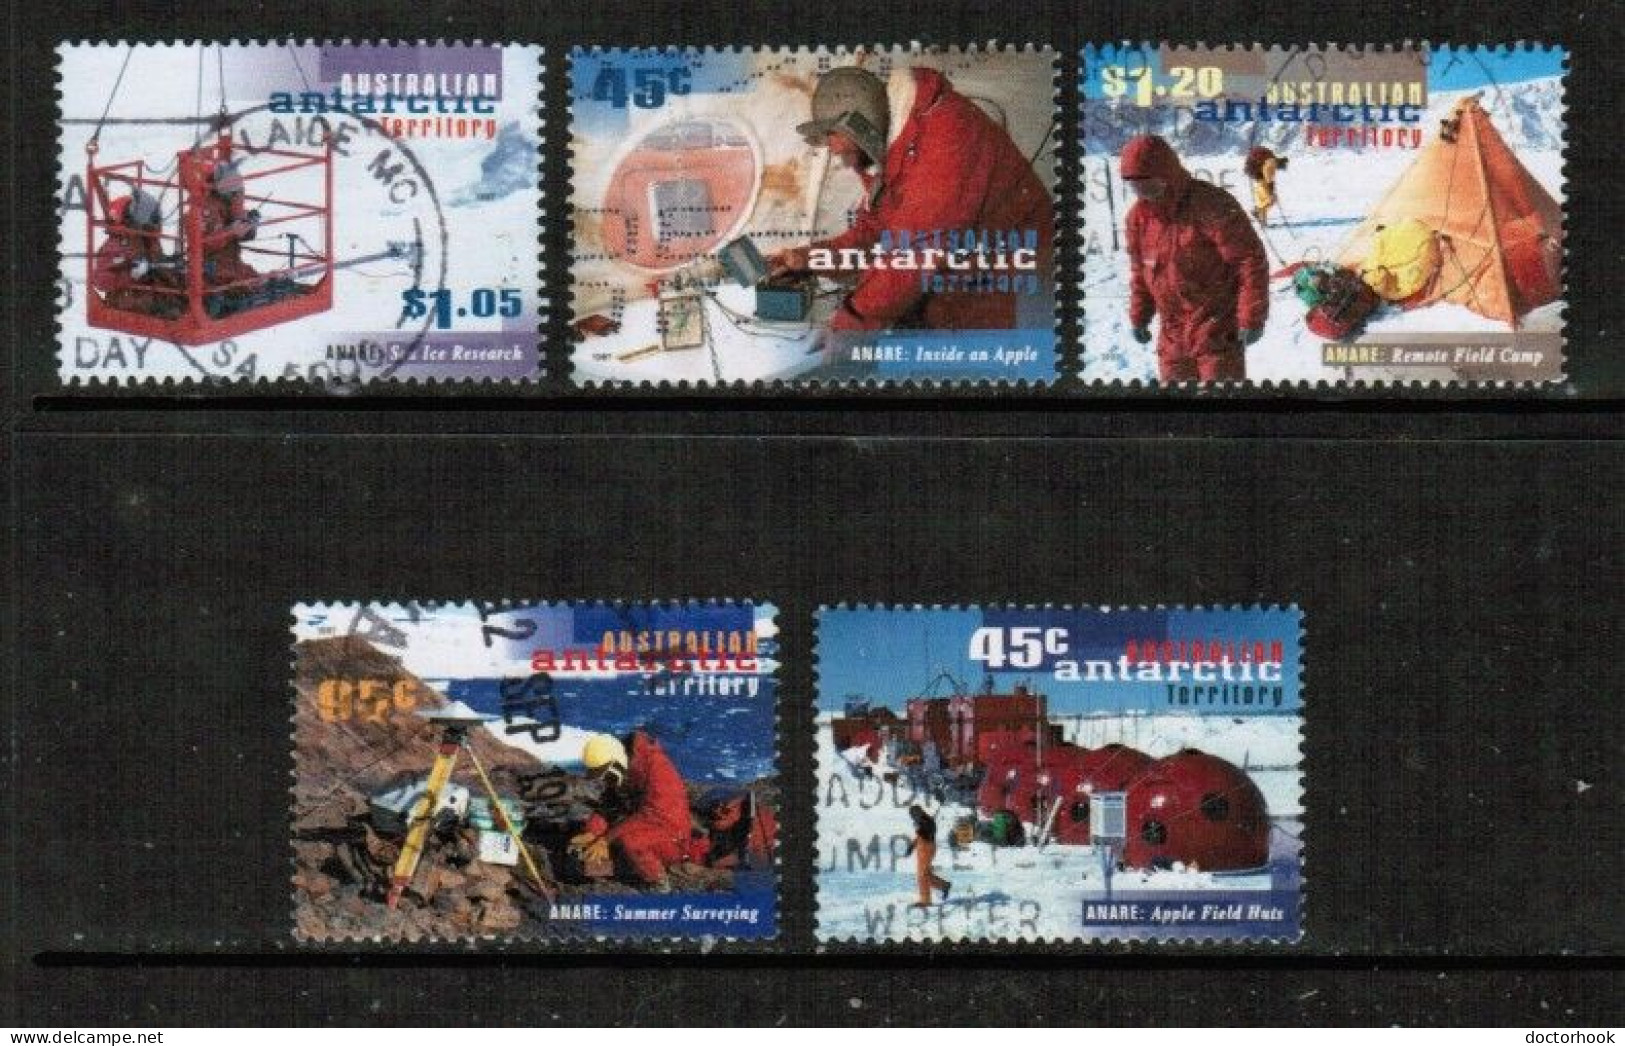 AUSTRALIAN ANTARCTIC TERRITORY   Scott # L 102-6 USED (CONDITION AS PER SCAN) (Stamp Scan # 929-9) - Used Stamps